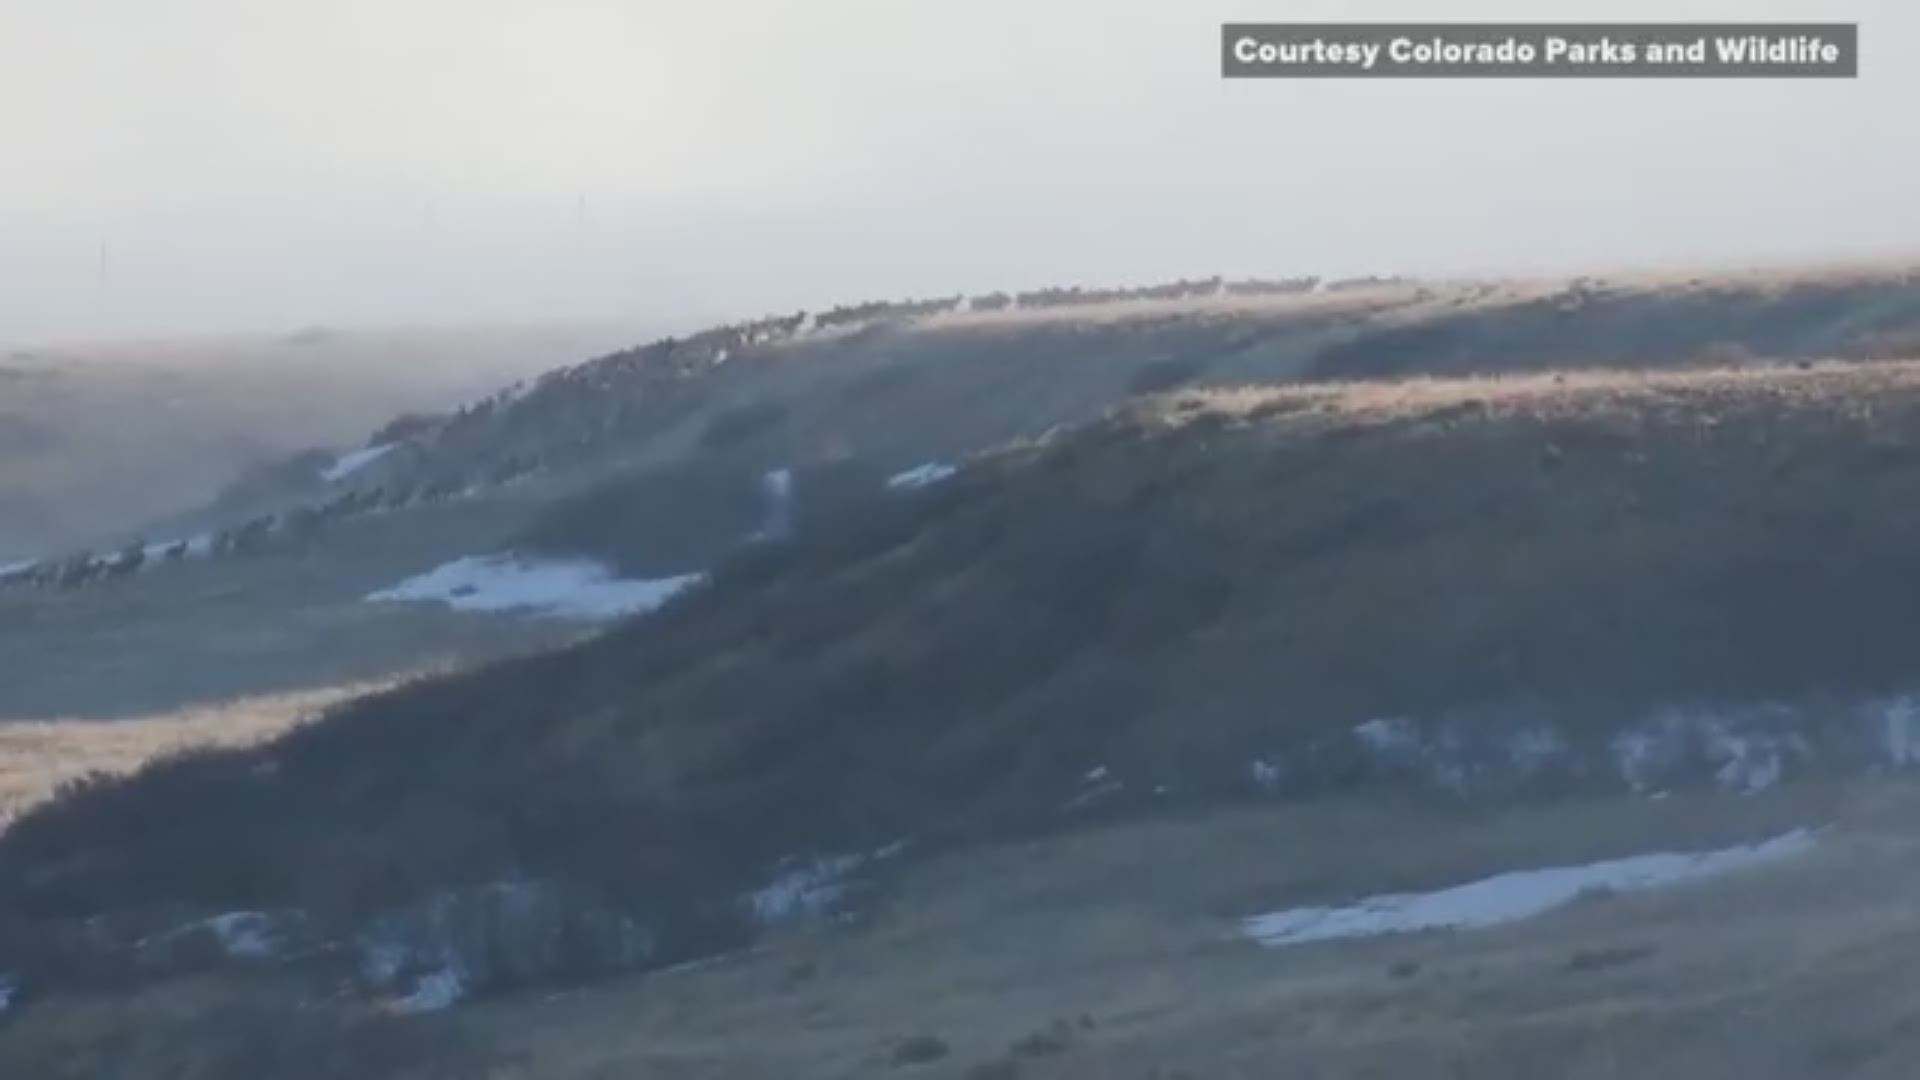 A herd of some 150 elk was spotted by Colorado Parks and Wildlife running together in the foothills 20 miles northwest of Denver.